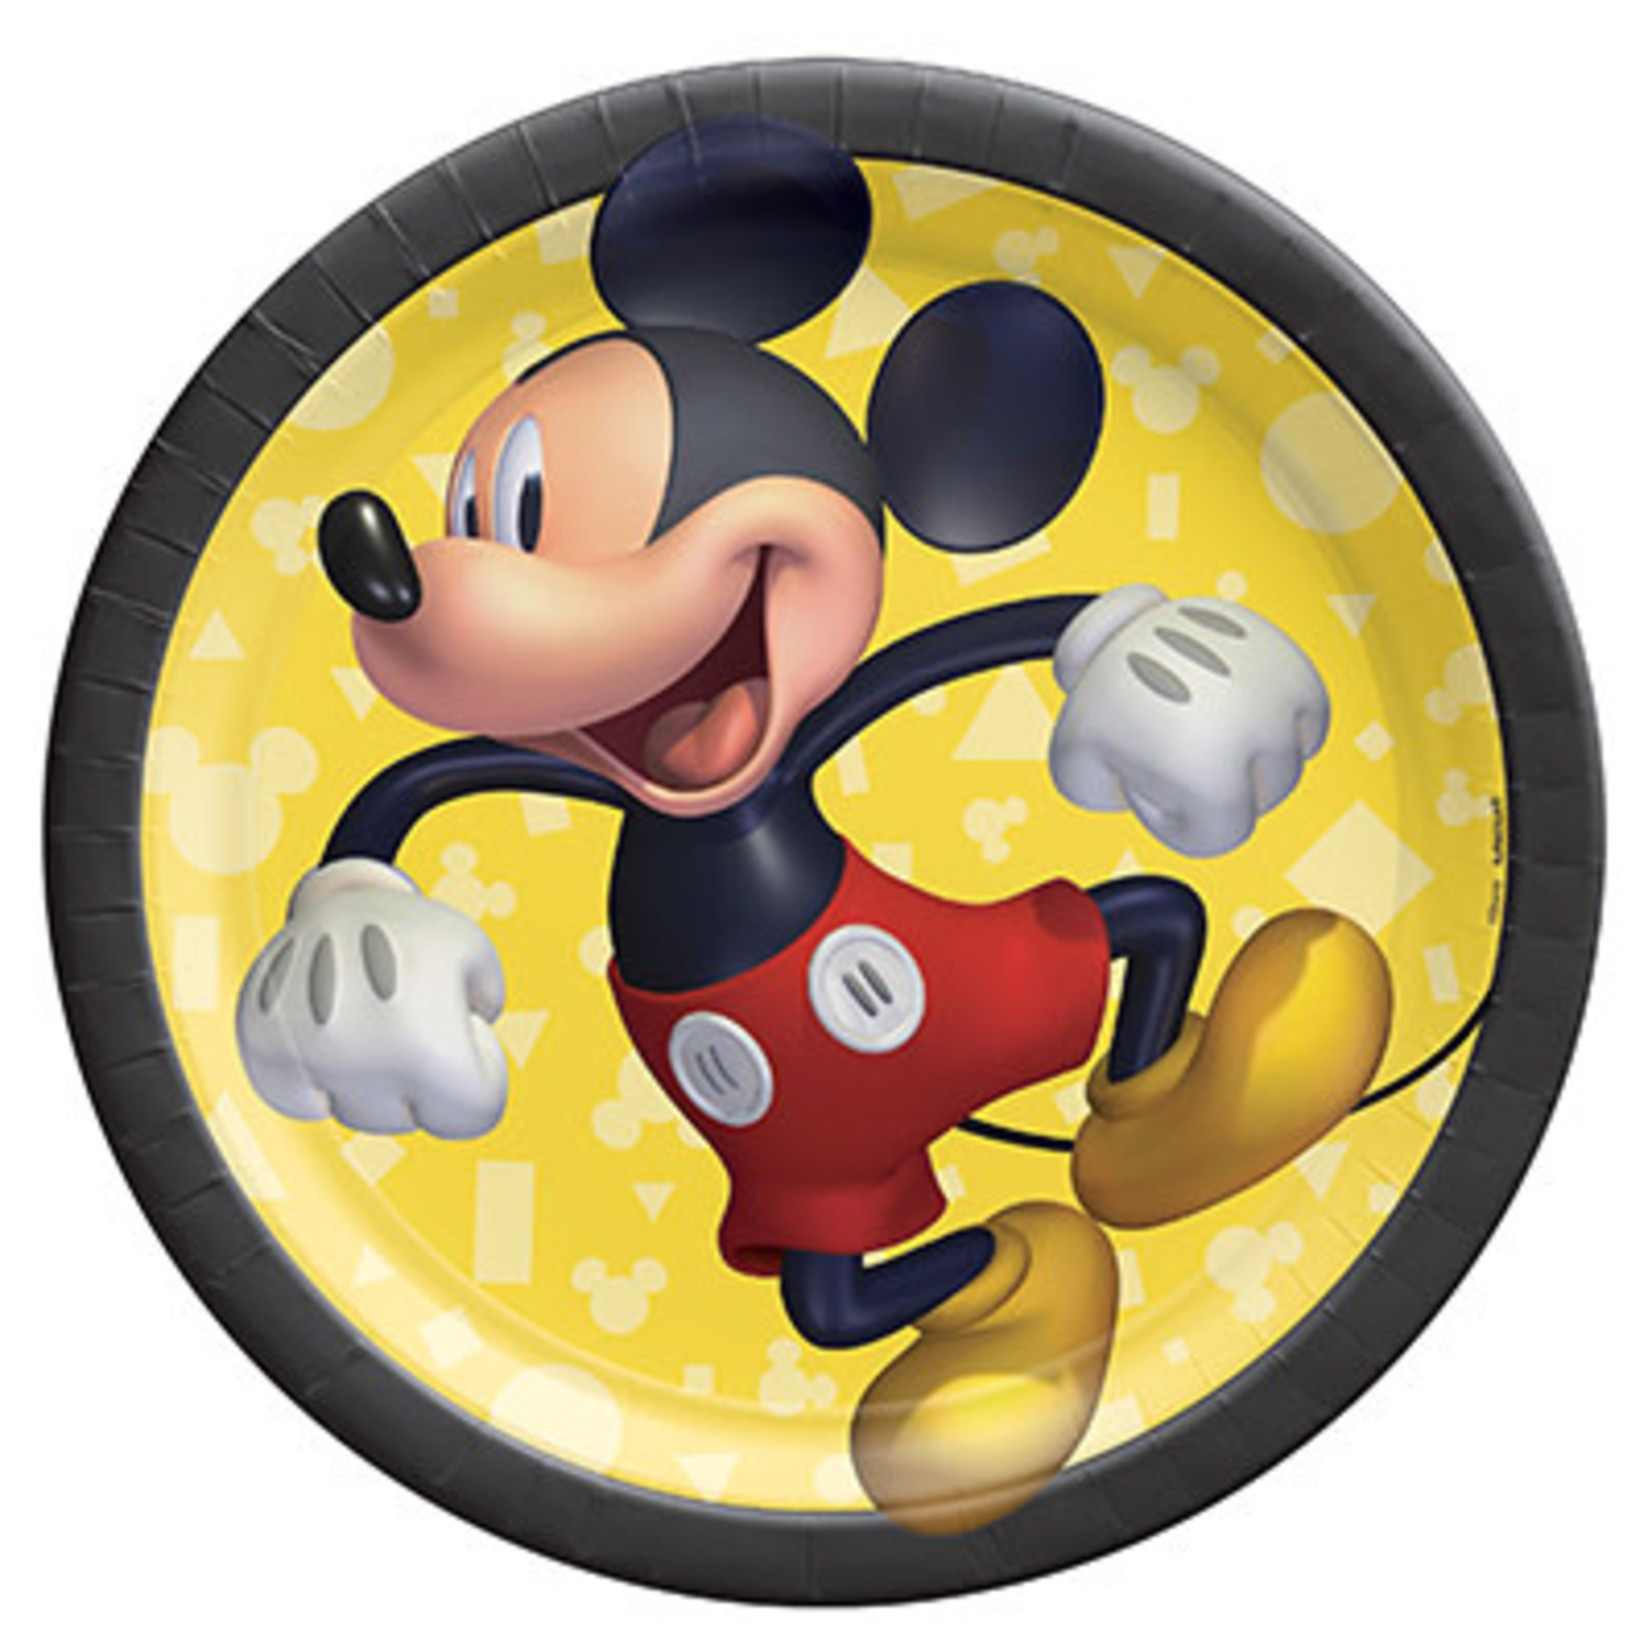 Amscan 7" Mickey Mouse Forever Plates - 8ct.